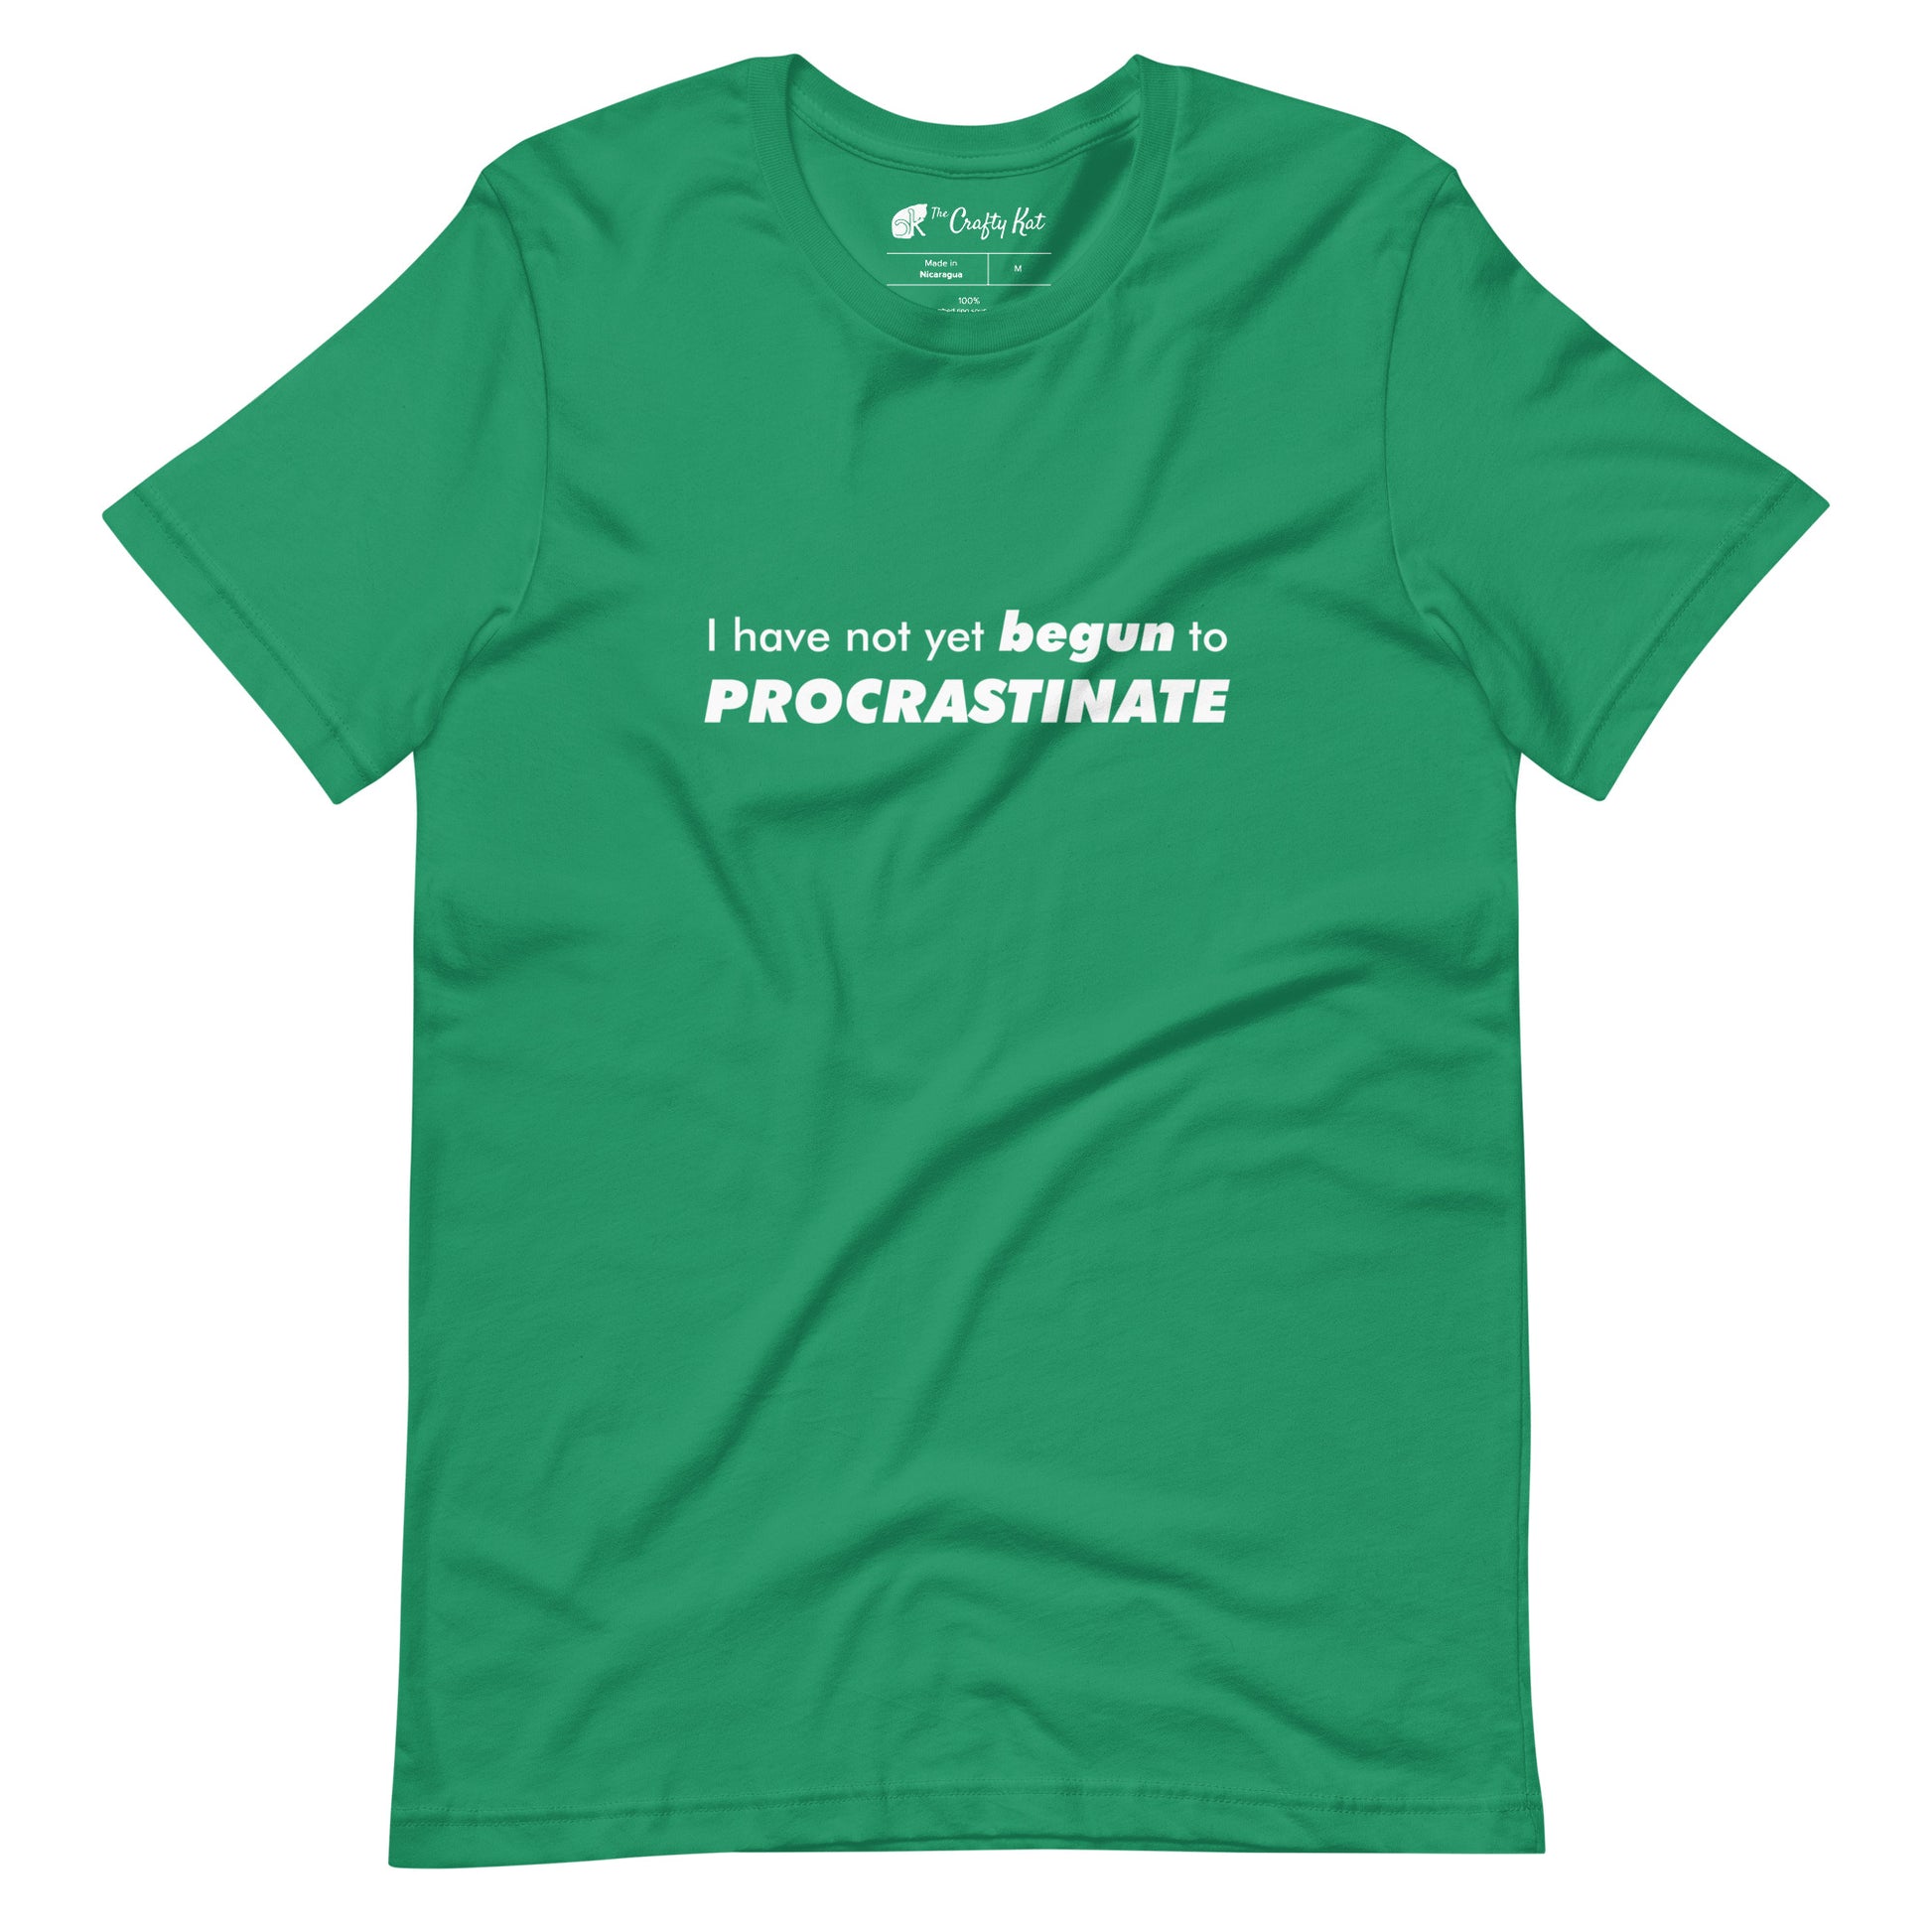 Kelly green t-shirt with text graphic: "I have not yet BEGUN to PROCRASTINATE"